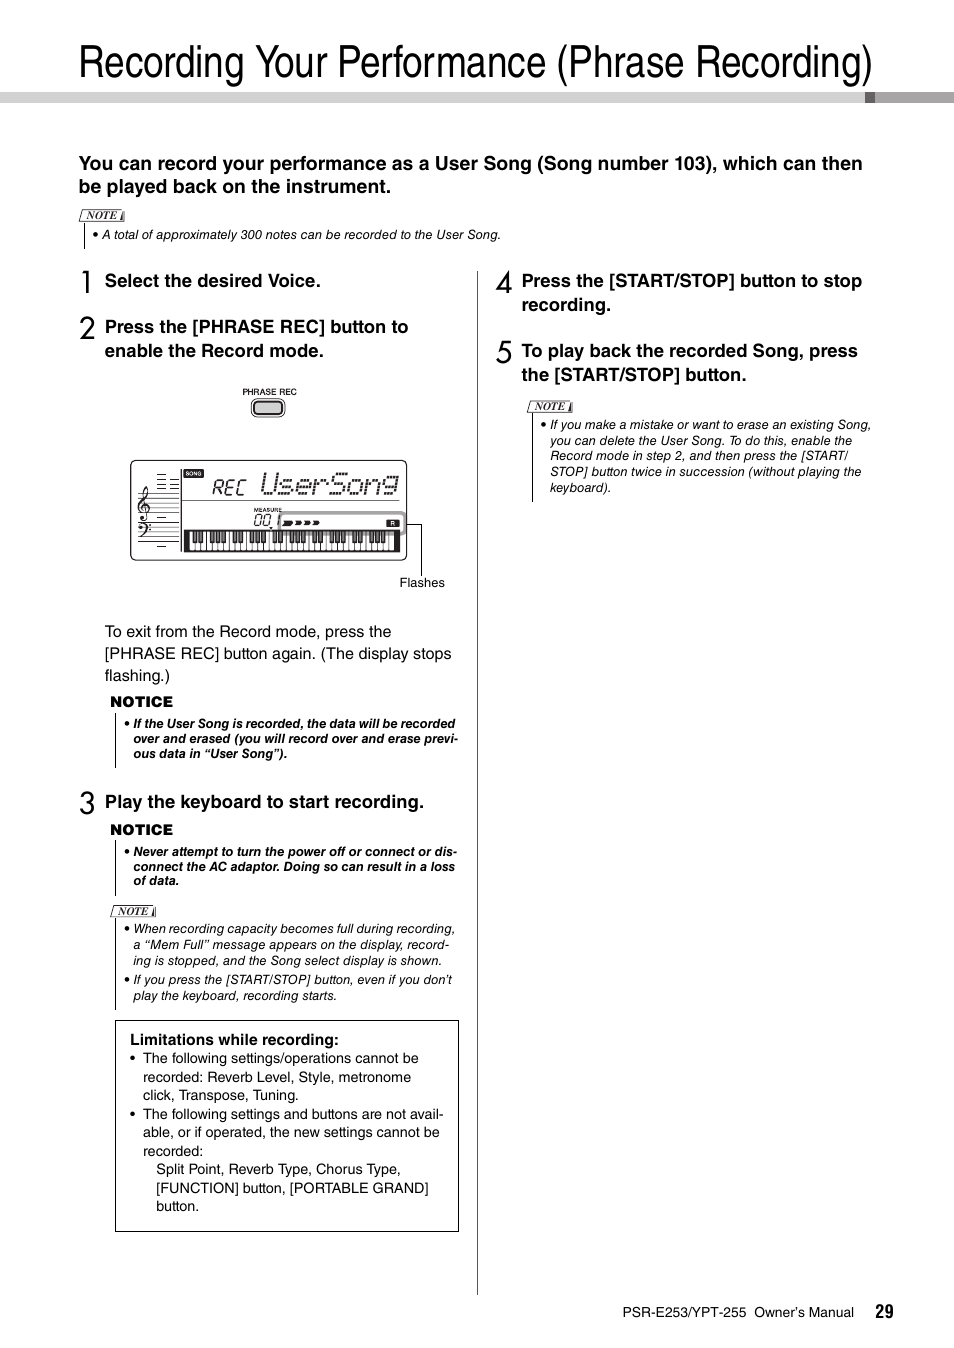 Recording your performance (phrase recording), Usersong | Yamaha PSR-E253 User Manual | Page 29 / 48